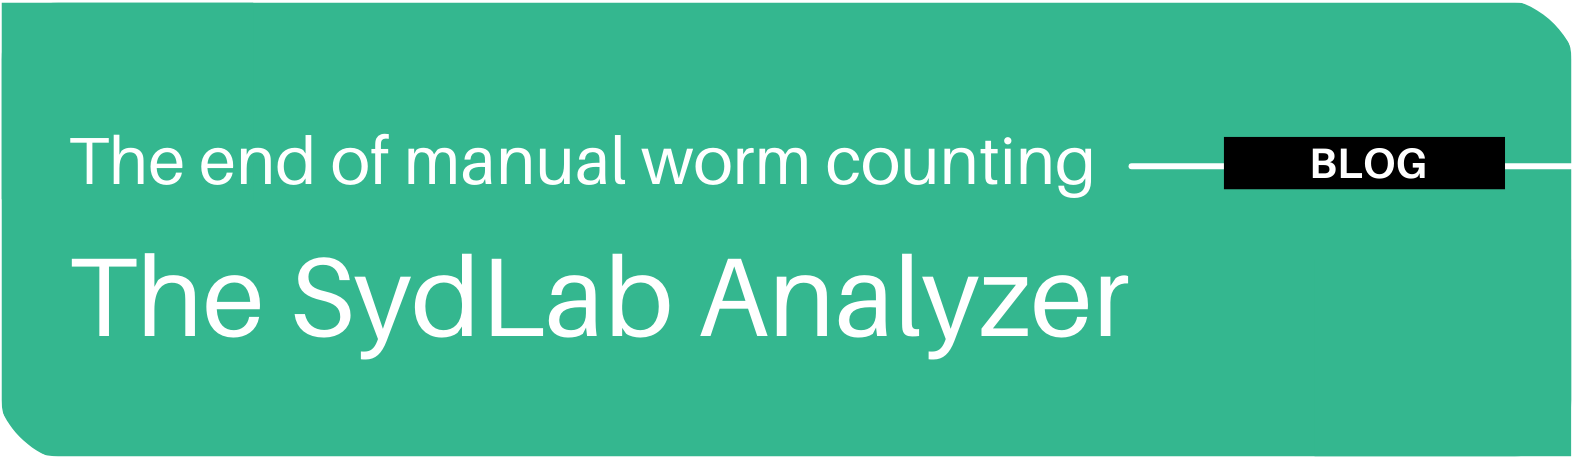 The SydLab Analyzer – The end of manual worm counting